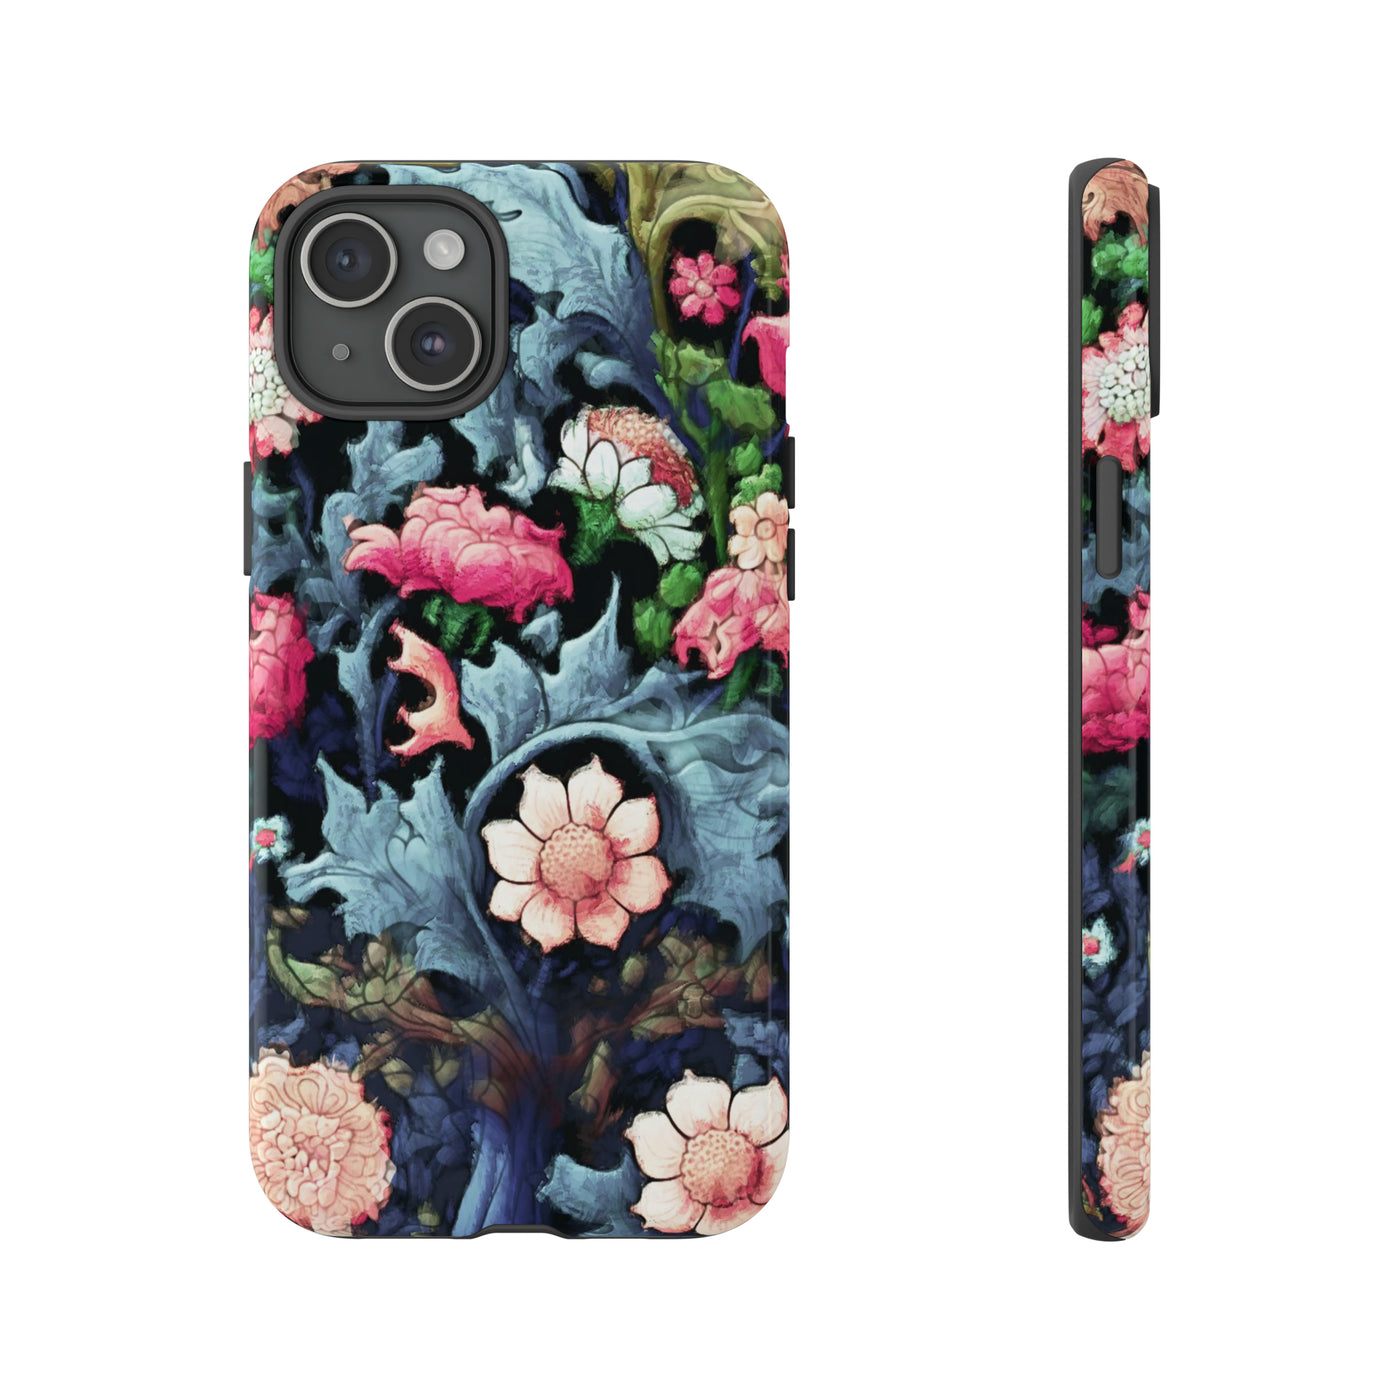 Cute IPhone Case | iPhone 15 Case | iPhone 15 Pro Max Case, Iphone 14 Case, Iphone 14 Pro Max Case IPhone Case for Flowers Lovers, Floral